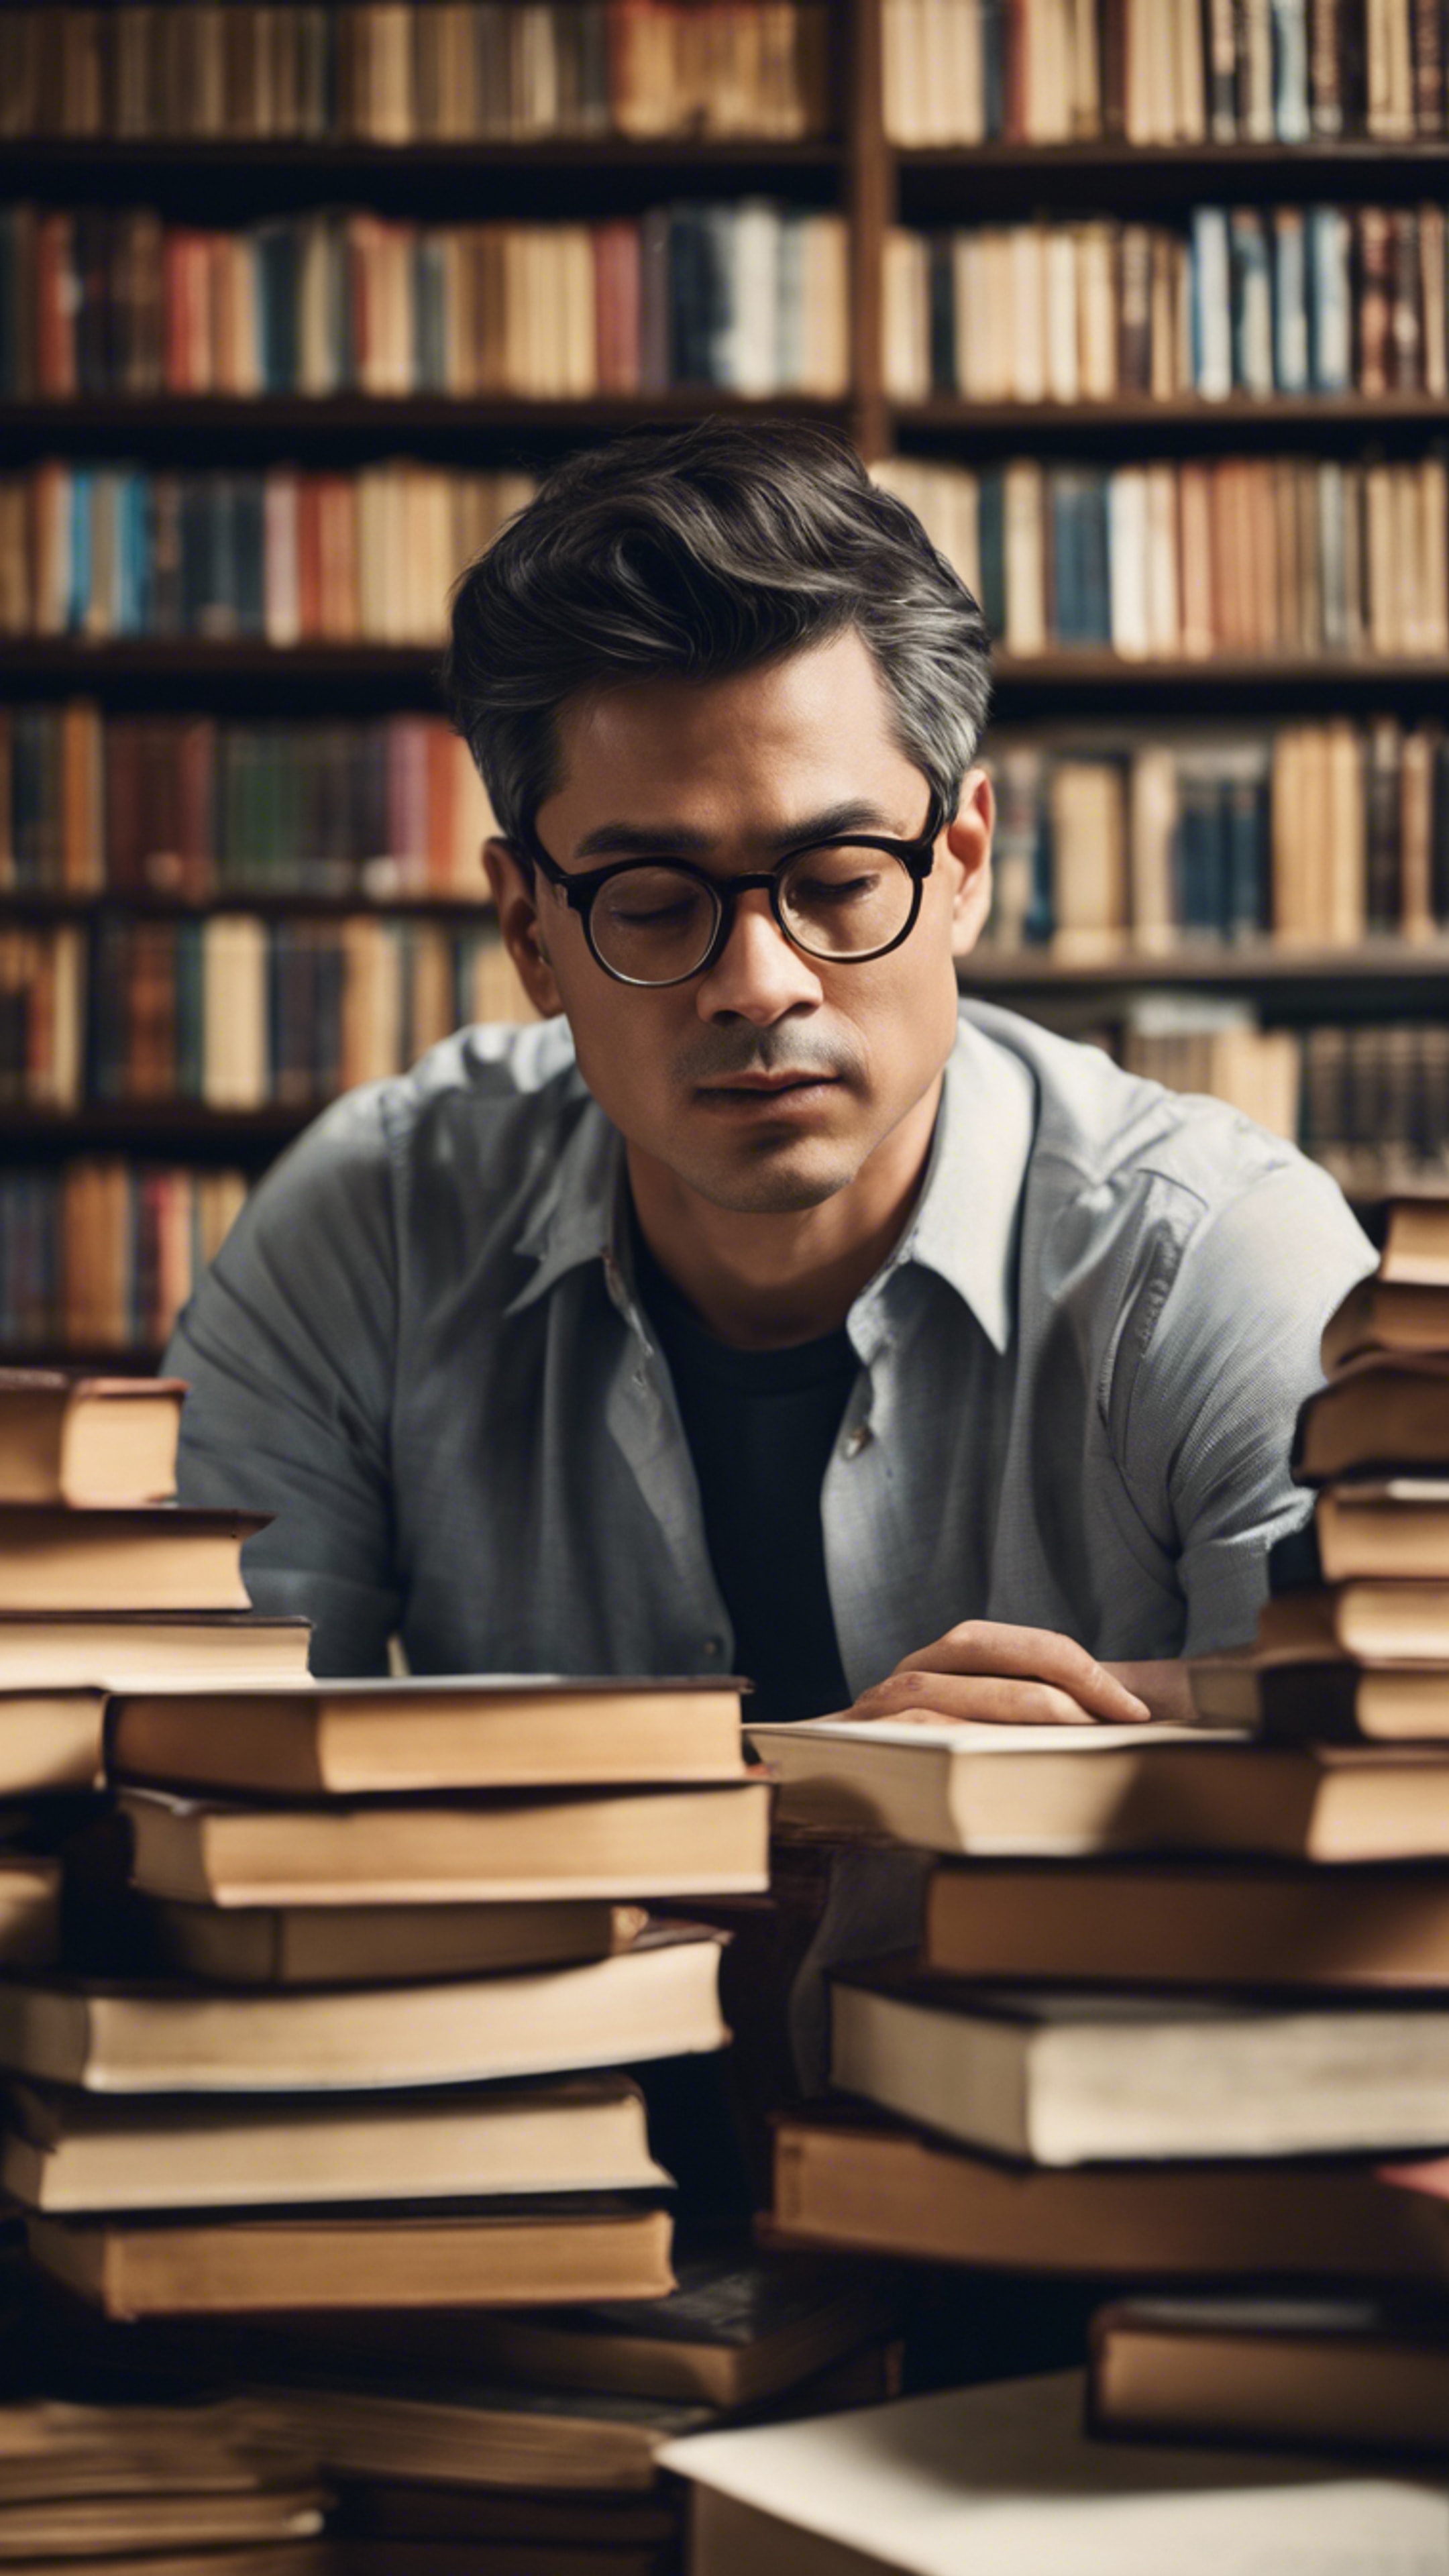 An intelligent man in glasses, deeply engrossed in his studies surrounded by stacks of books in a quiet library. 牆紙[88f4531613da45079a41]